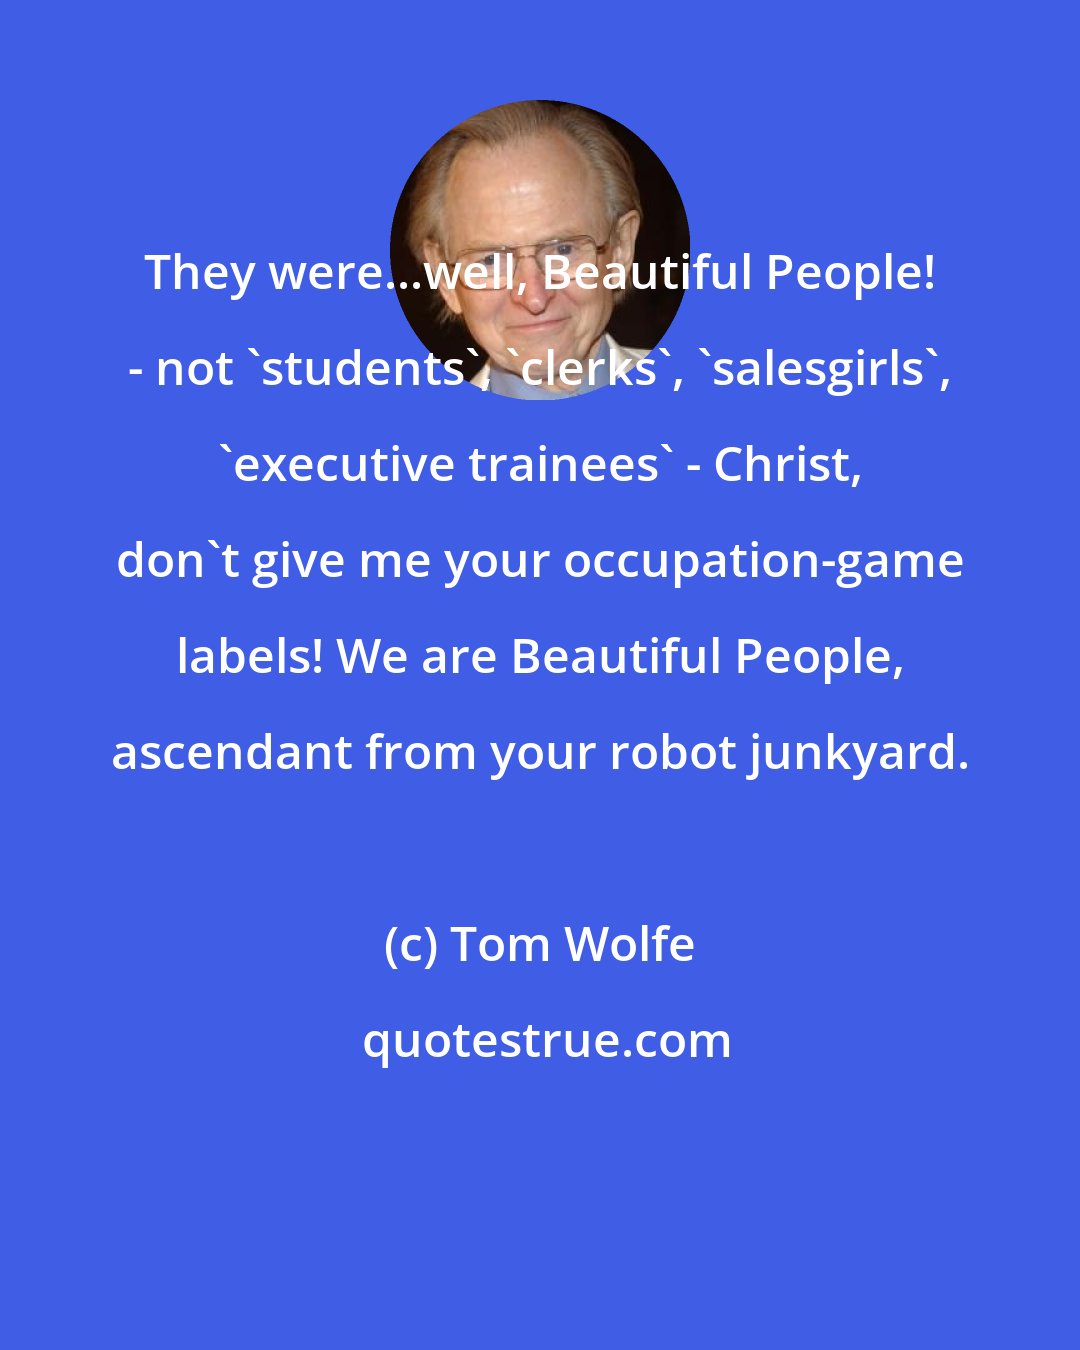 Tom Wolfe: They were...well, Beautiful People! - not 'students', 'clerks', 'salesgirls', 'executive trainees' - Christ, don't give me your occupation-game labels! We are Beautiful People, ascendant from your robot junkyard.